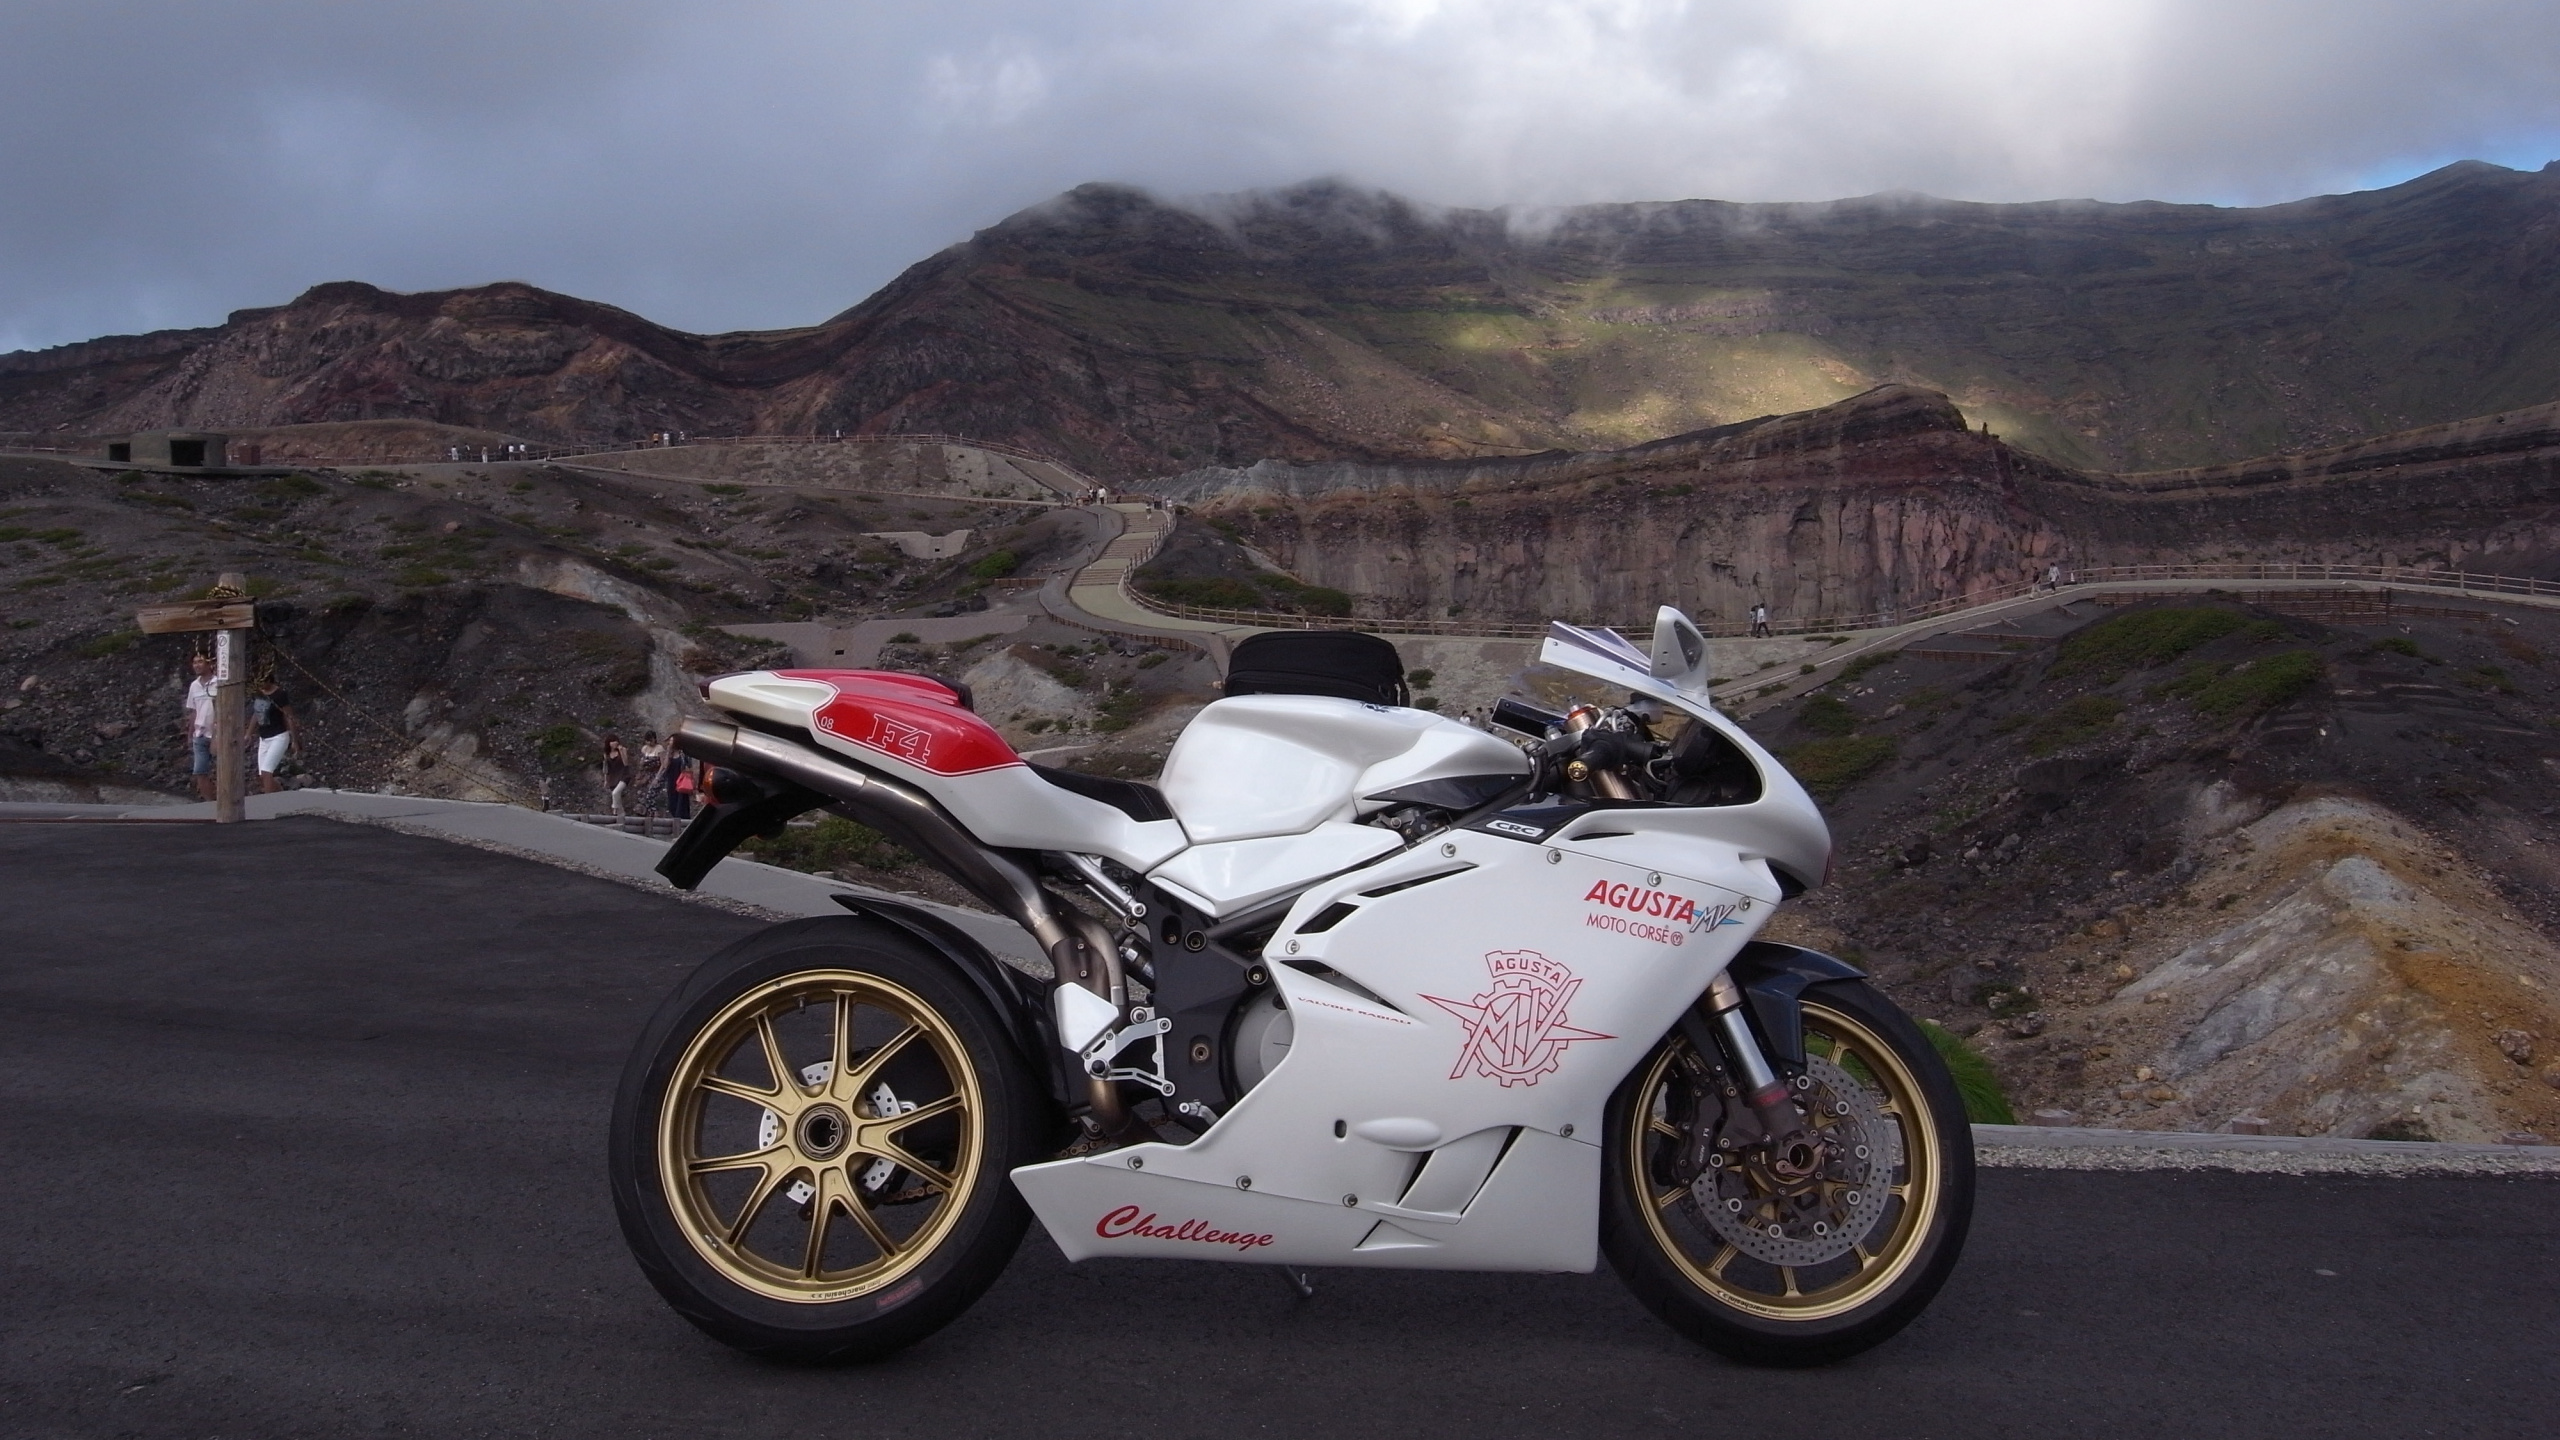 White and Black Sports Bike on Road During Daytime. Wallpaper in 2560x1440 Resolution